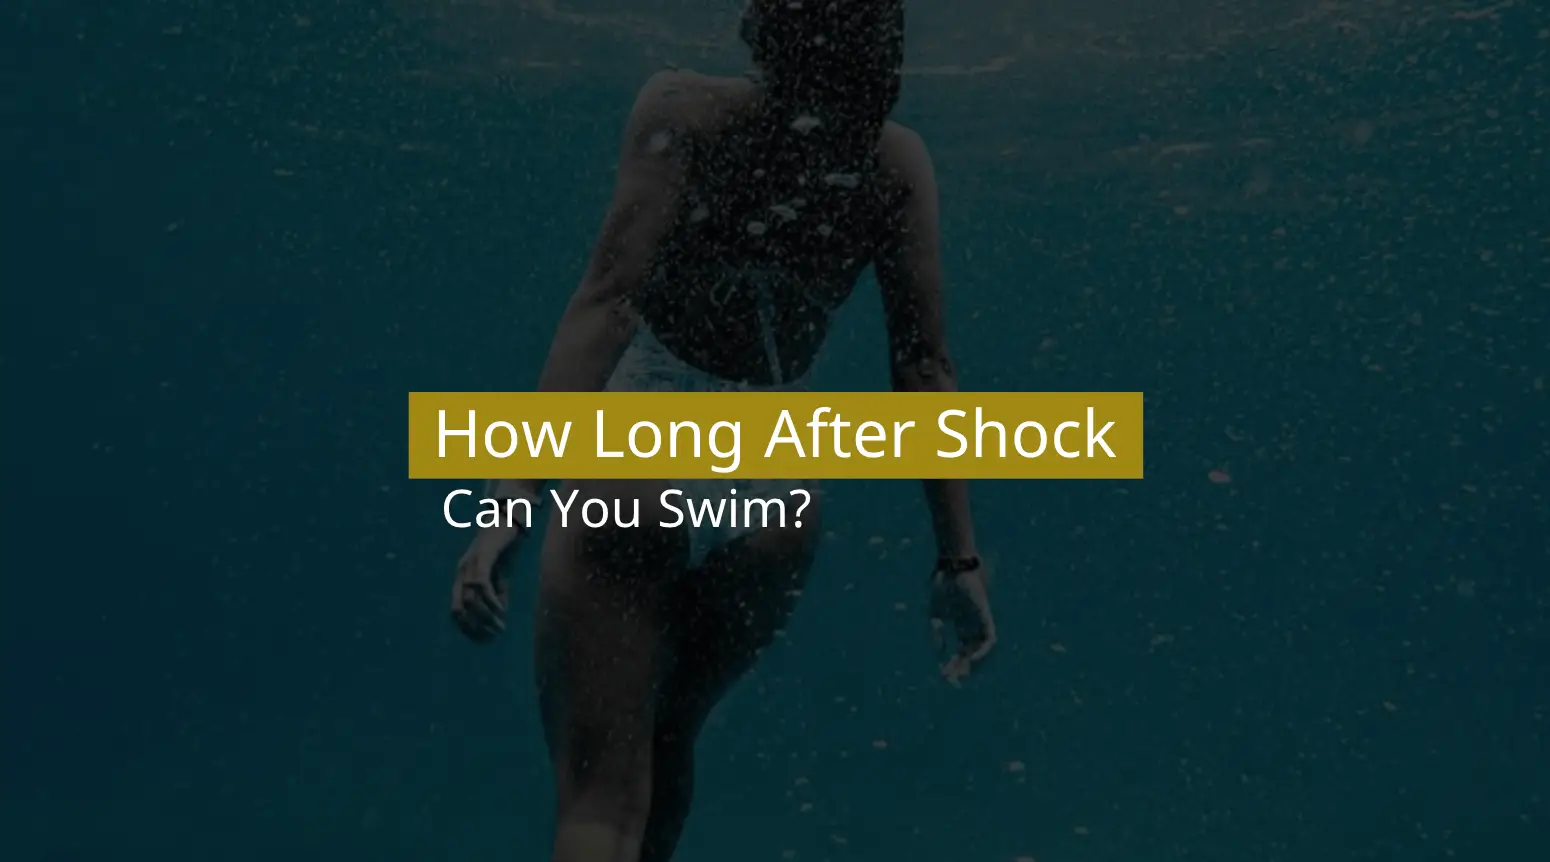 How Long After Shock Can You Swim?